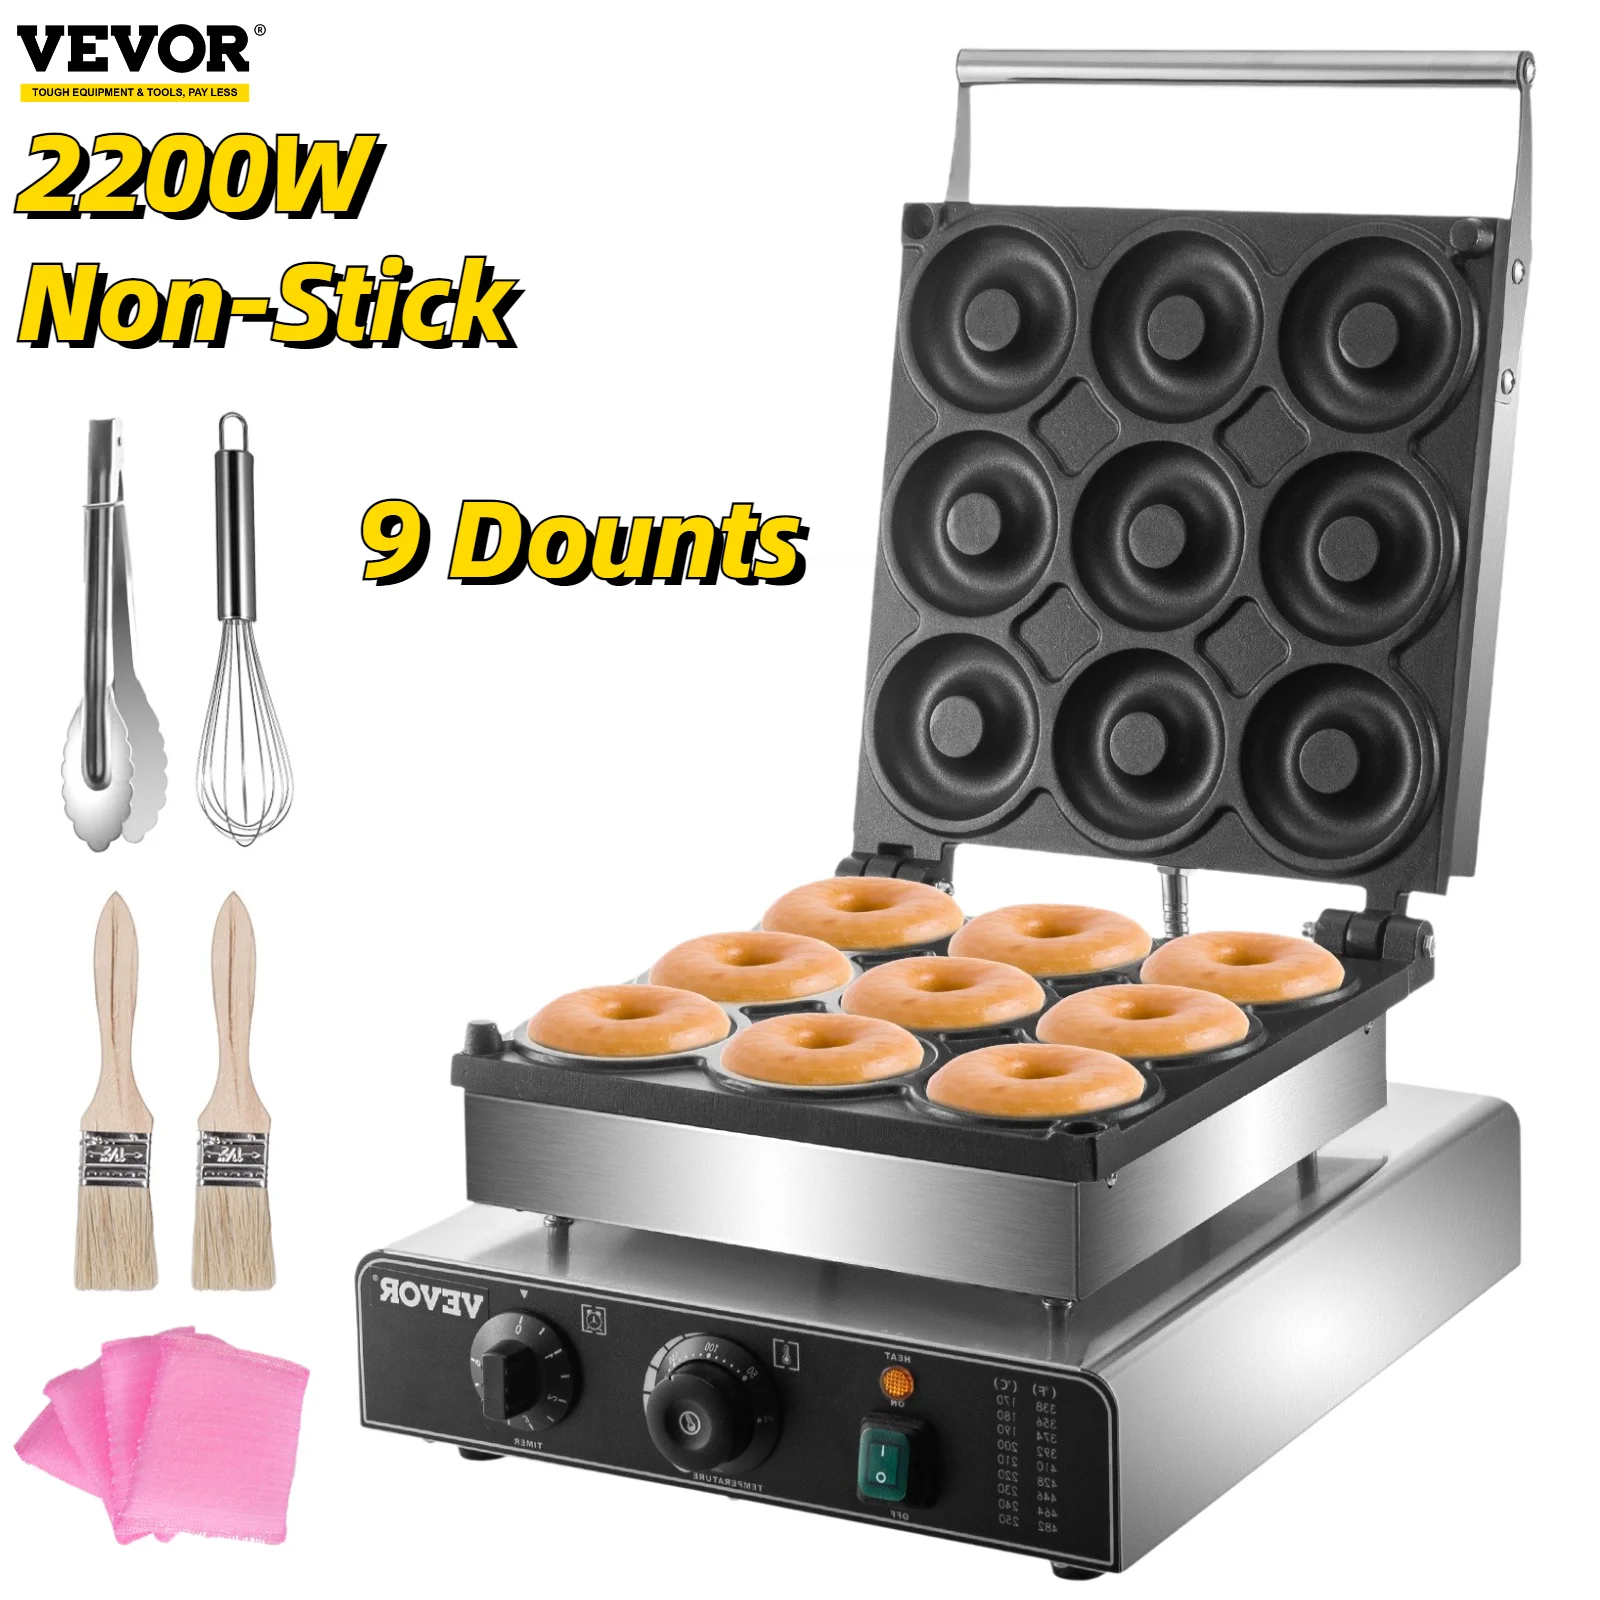 VEVOR Commercial Electric Waffle Maker Professional 9cm Donuts Making Machine 9PCS Circle Rings Double-sided Heating Gaufriers